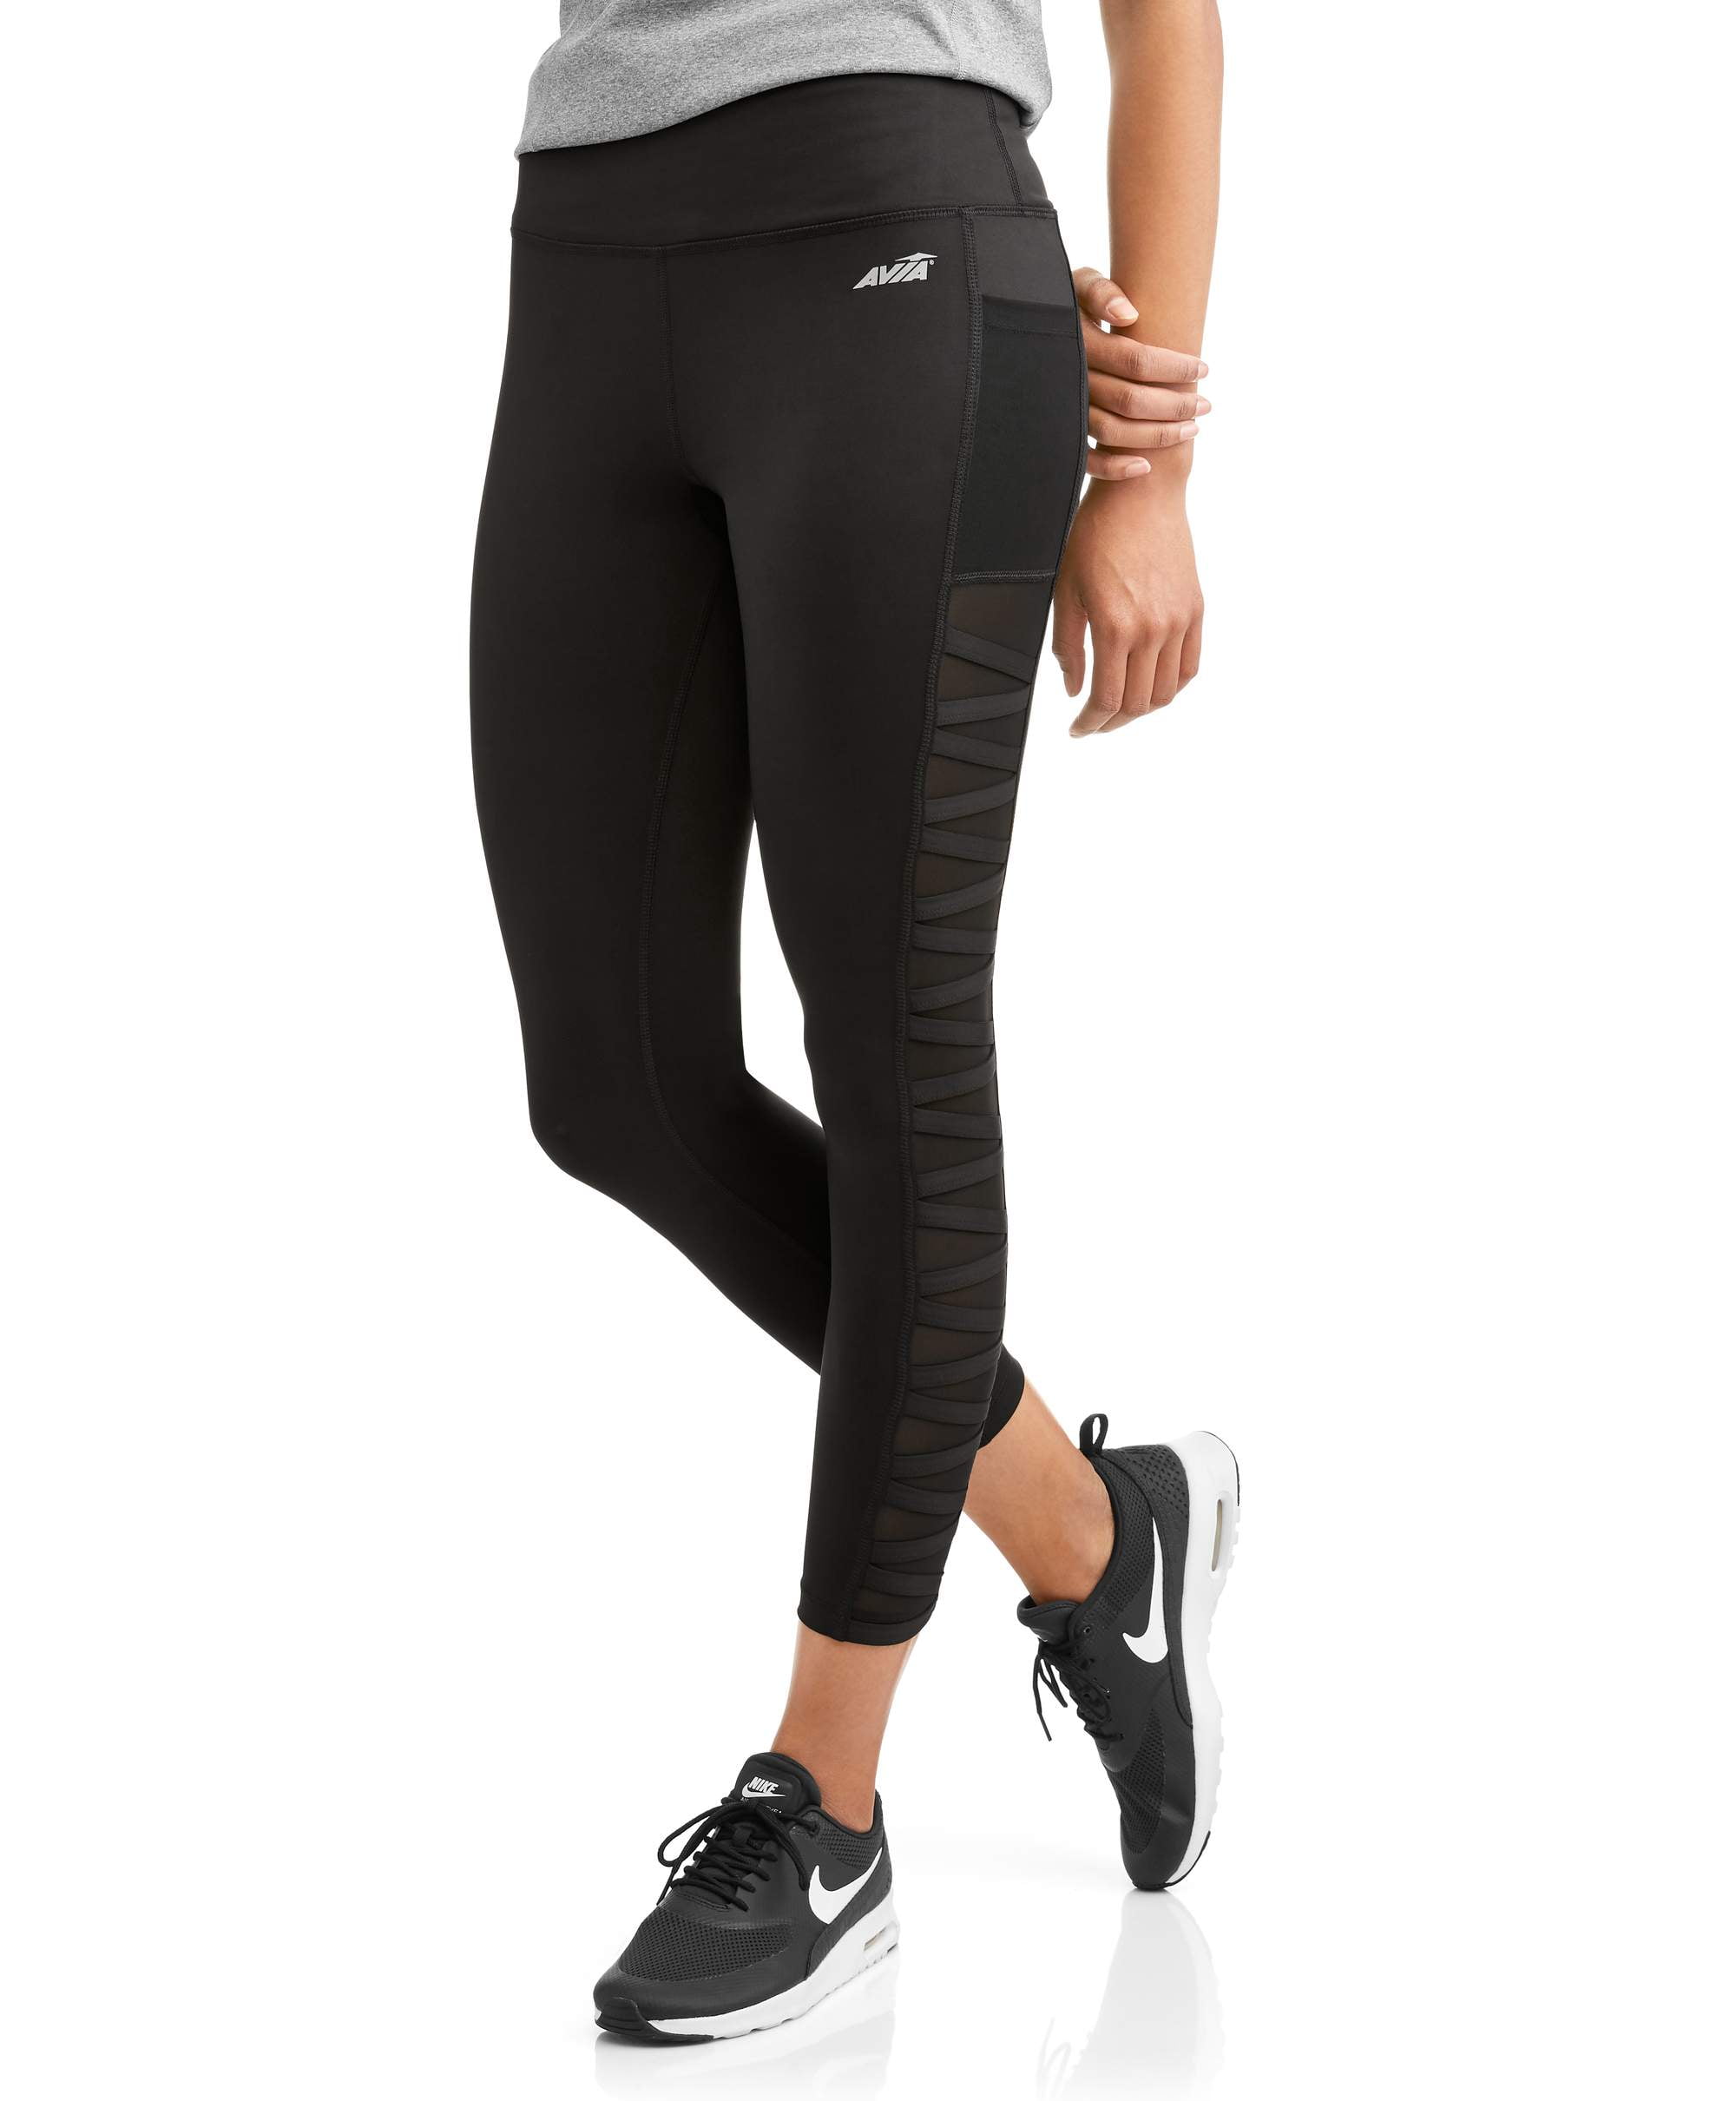 Avia Leggings With Pockets Walmart  International Society of Precision  Agriculture